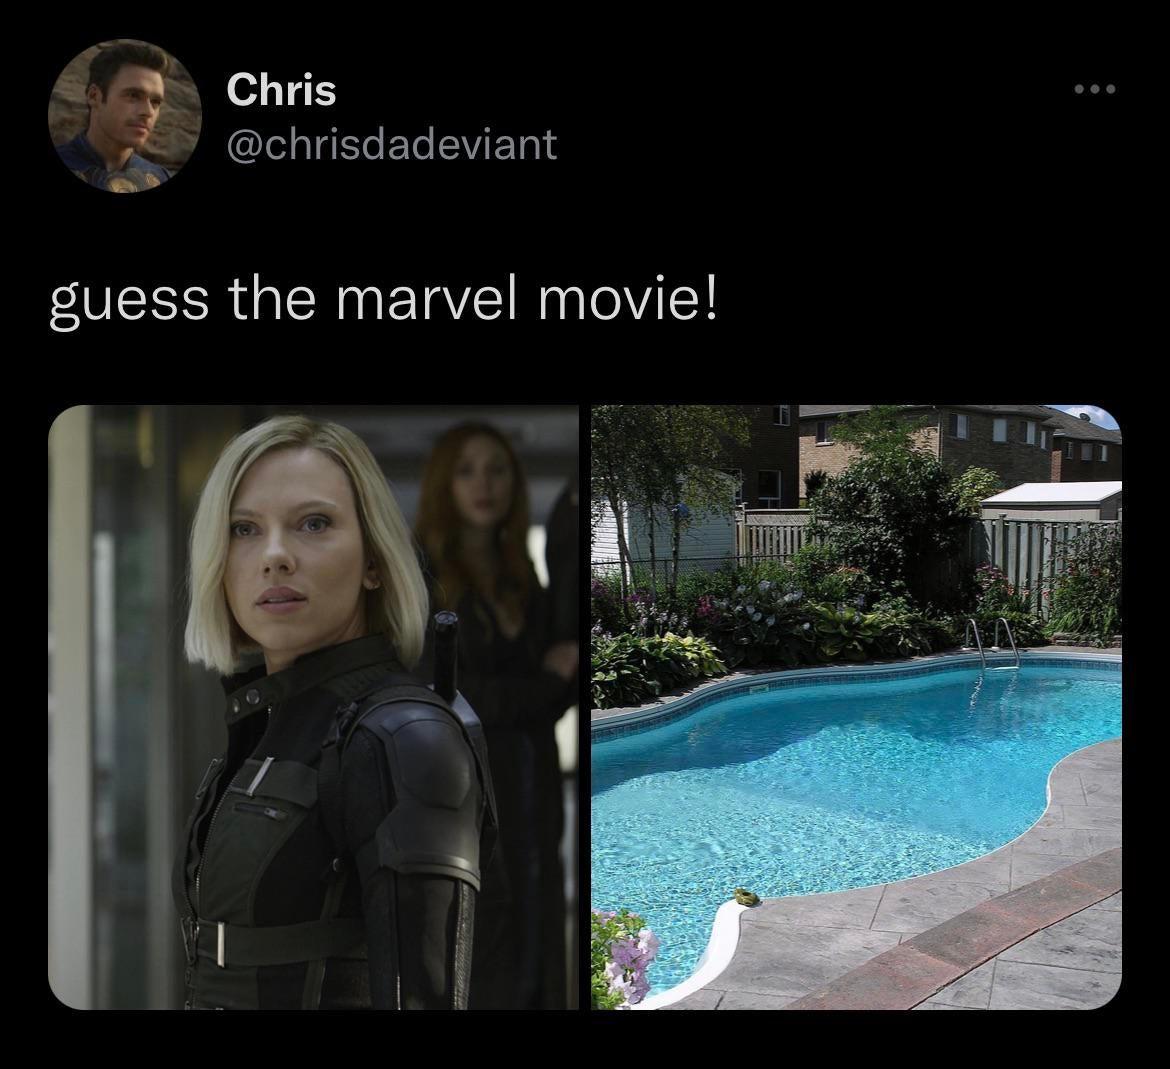 backyard swimming pools - Chris guess the marvel movie!